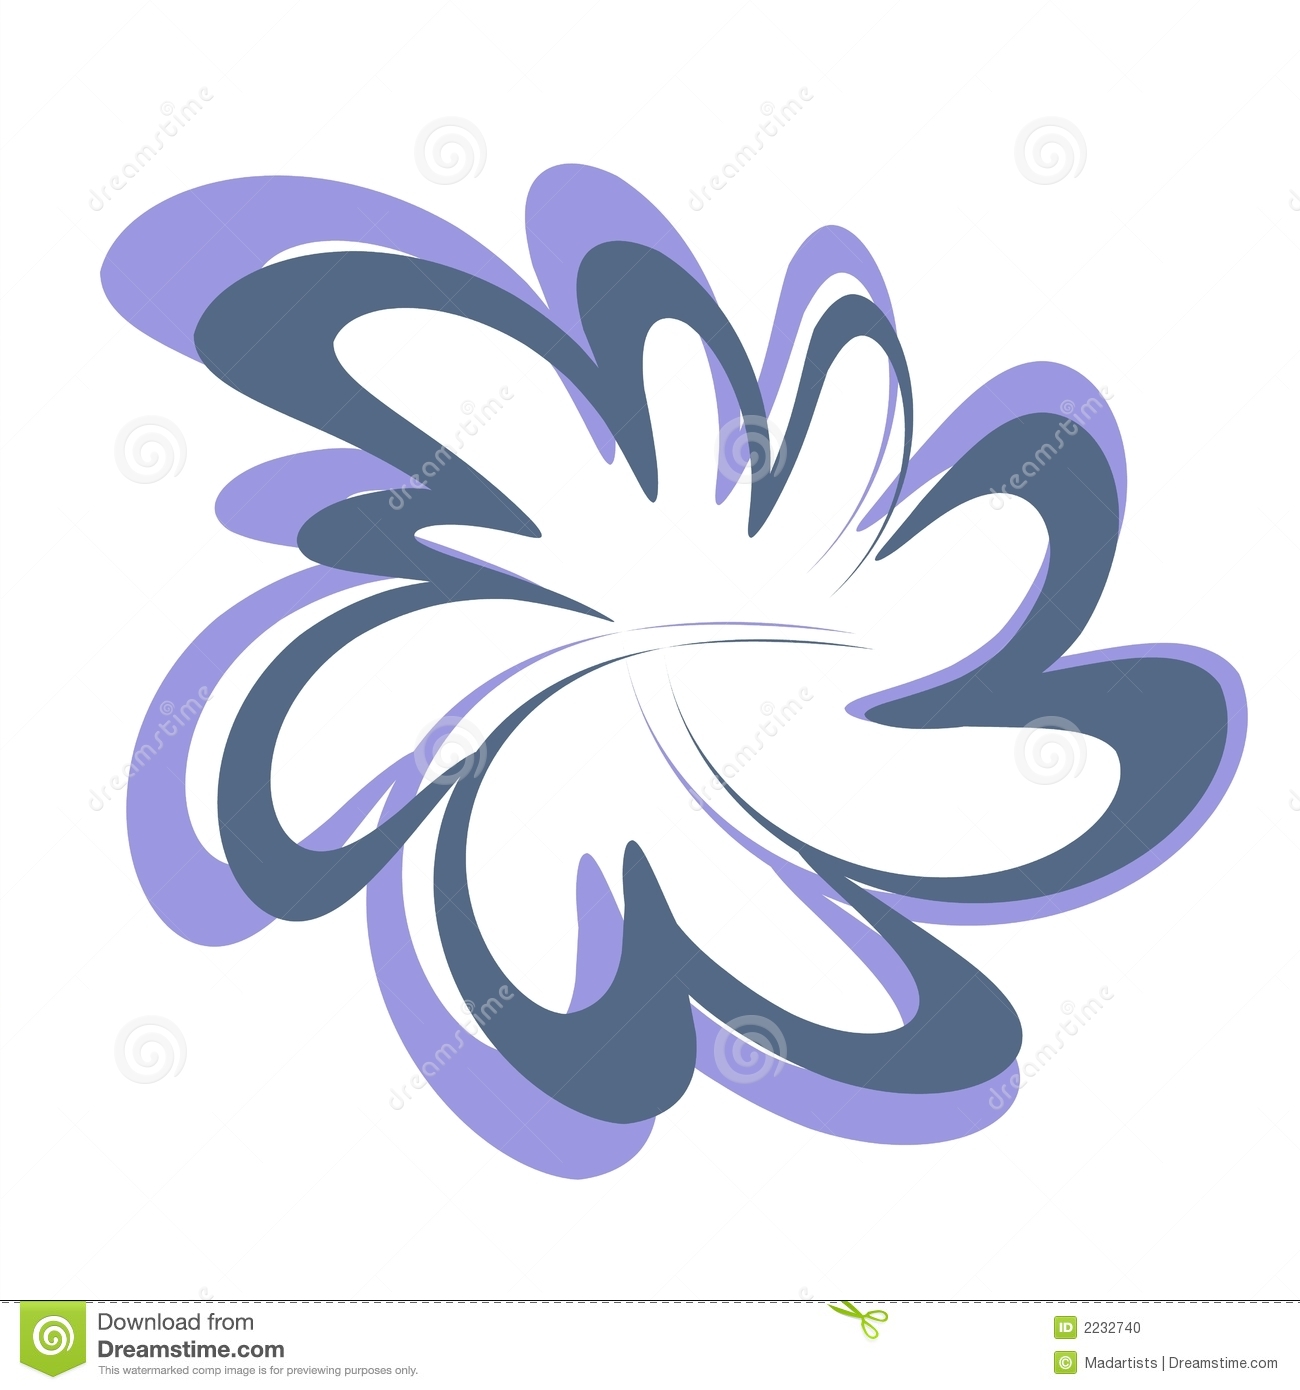 Abstract Flower Design Clipart Stock Photo   Image  2232740